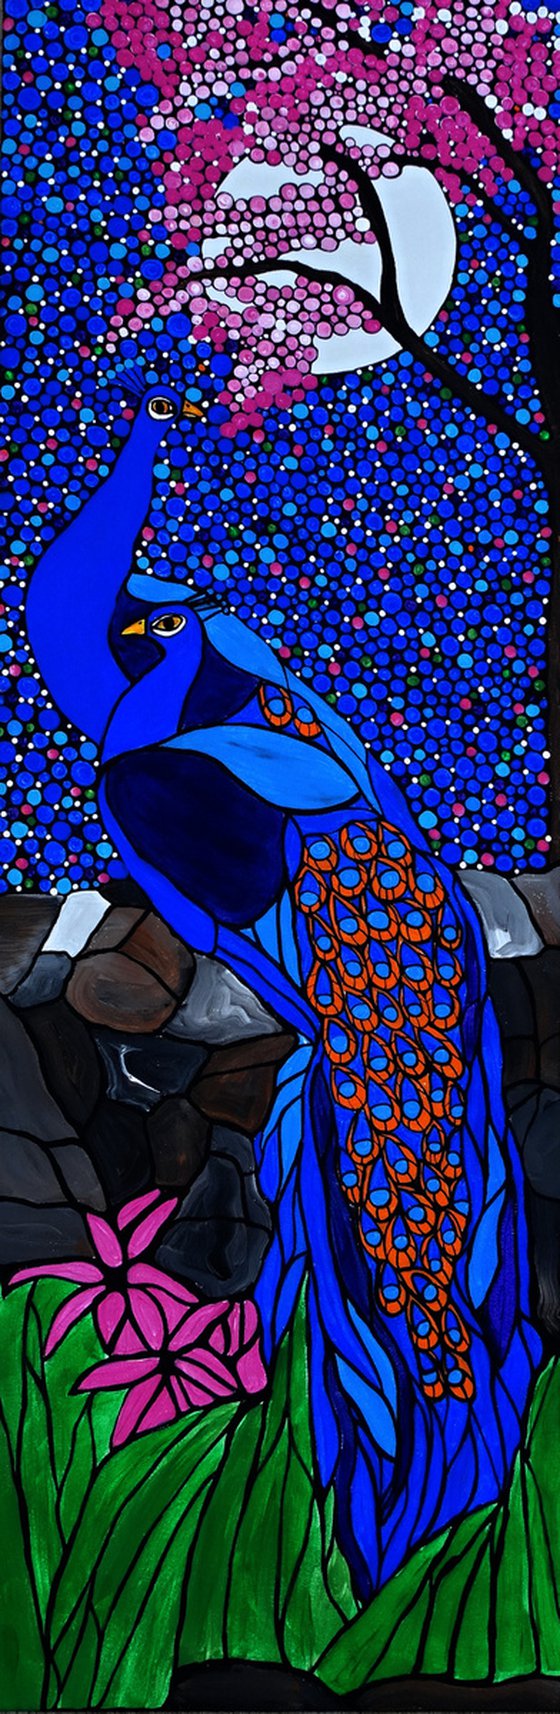 Stained glass peacock painting